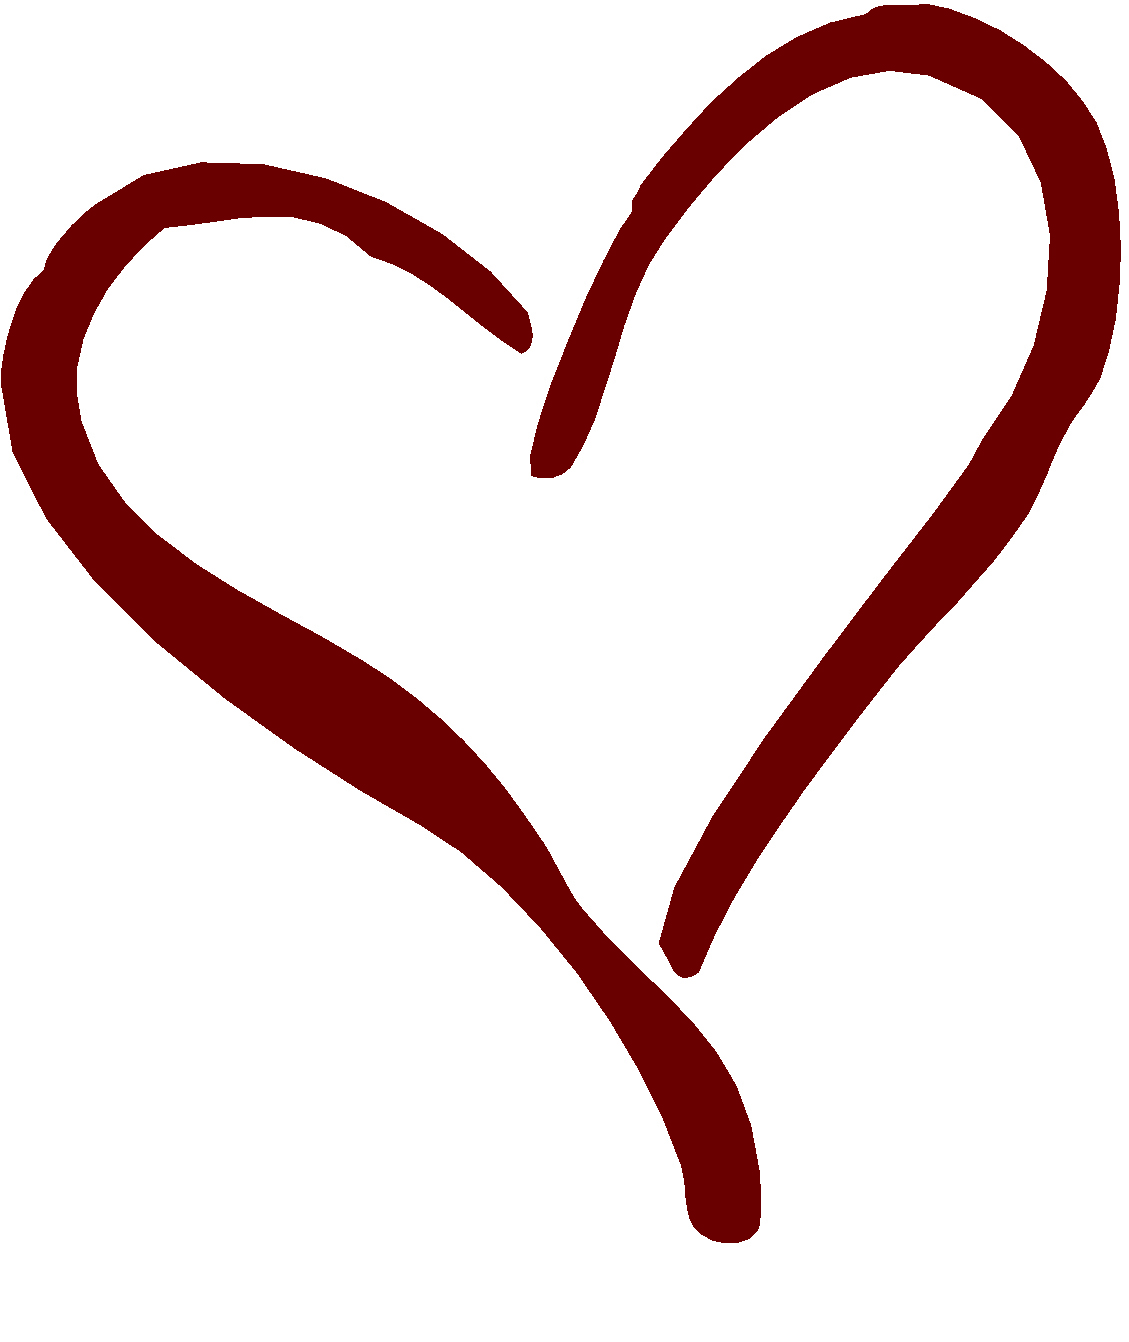 free strong heart clipart - photo #32